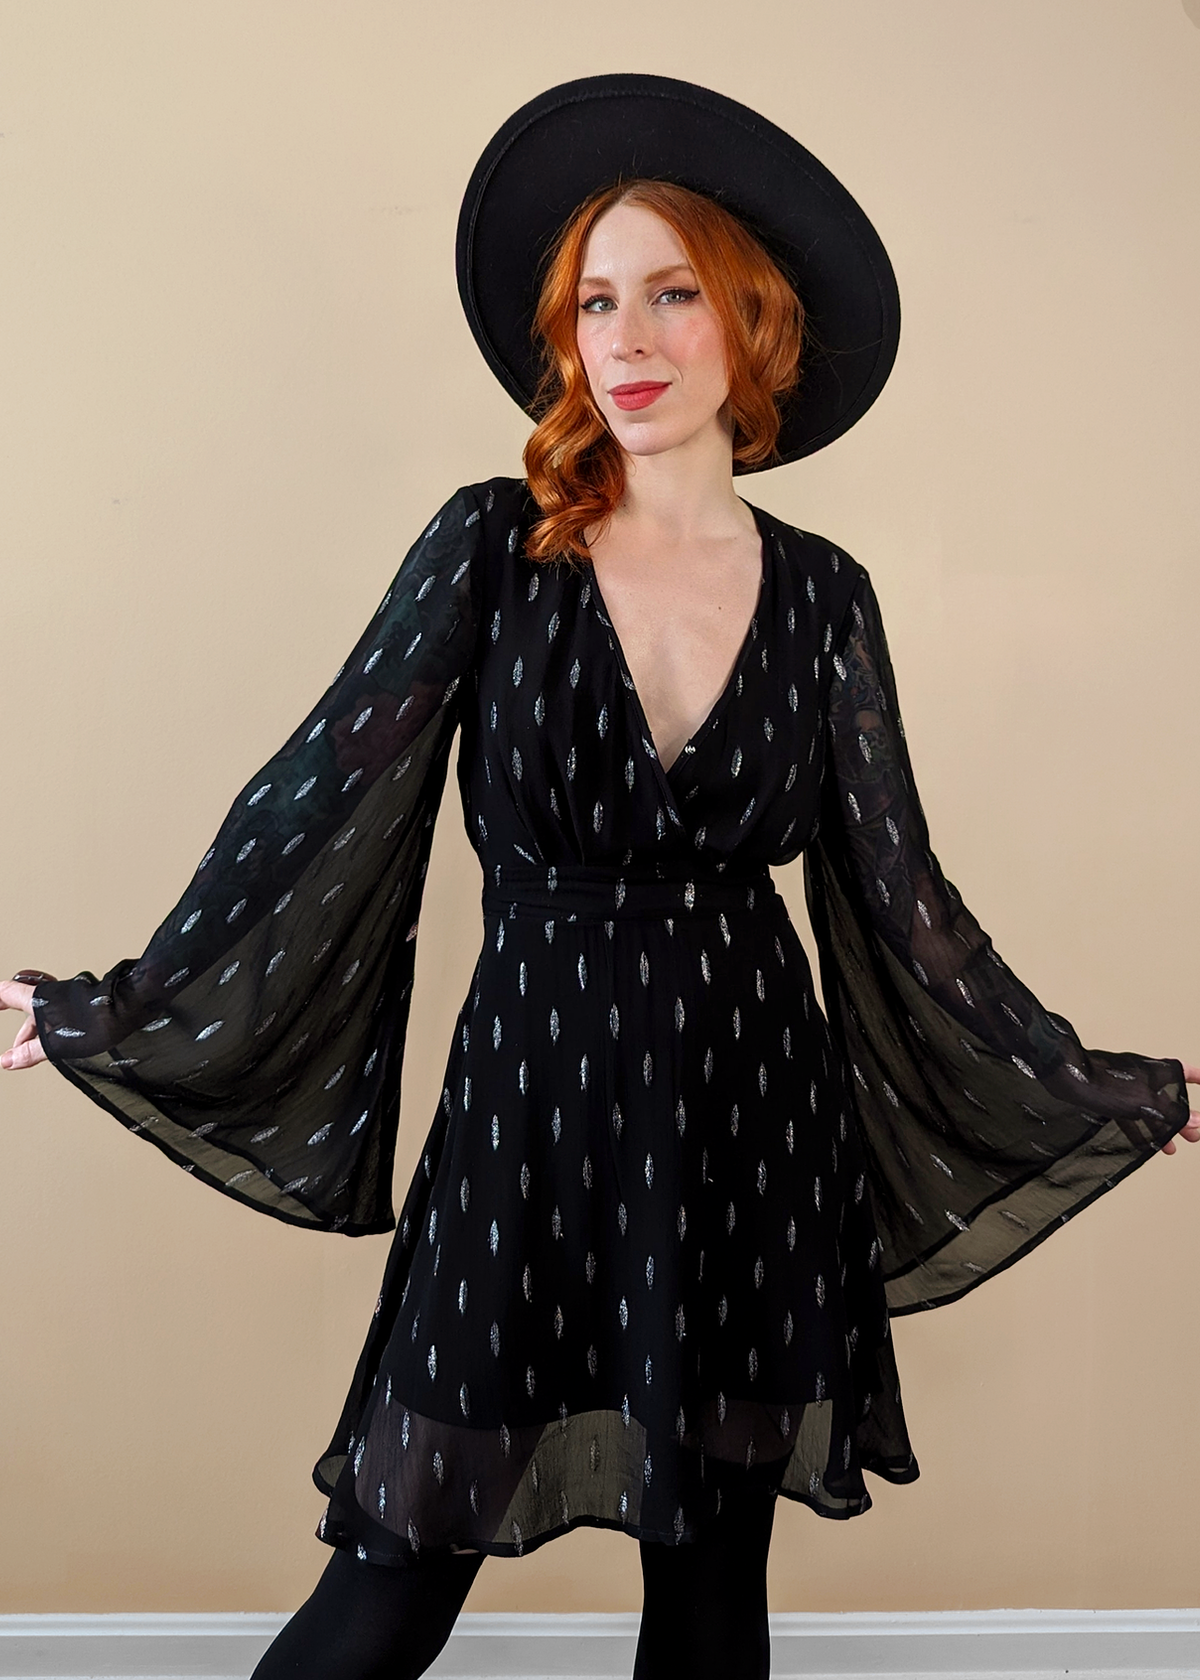 Stevie Nicks vibes. Witchy Angel Bell Sleeve Mini dress with v-neckline, and fluttery, floaty fit. Black chiffon with silver metallic threading details.